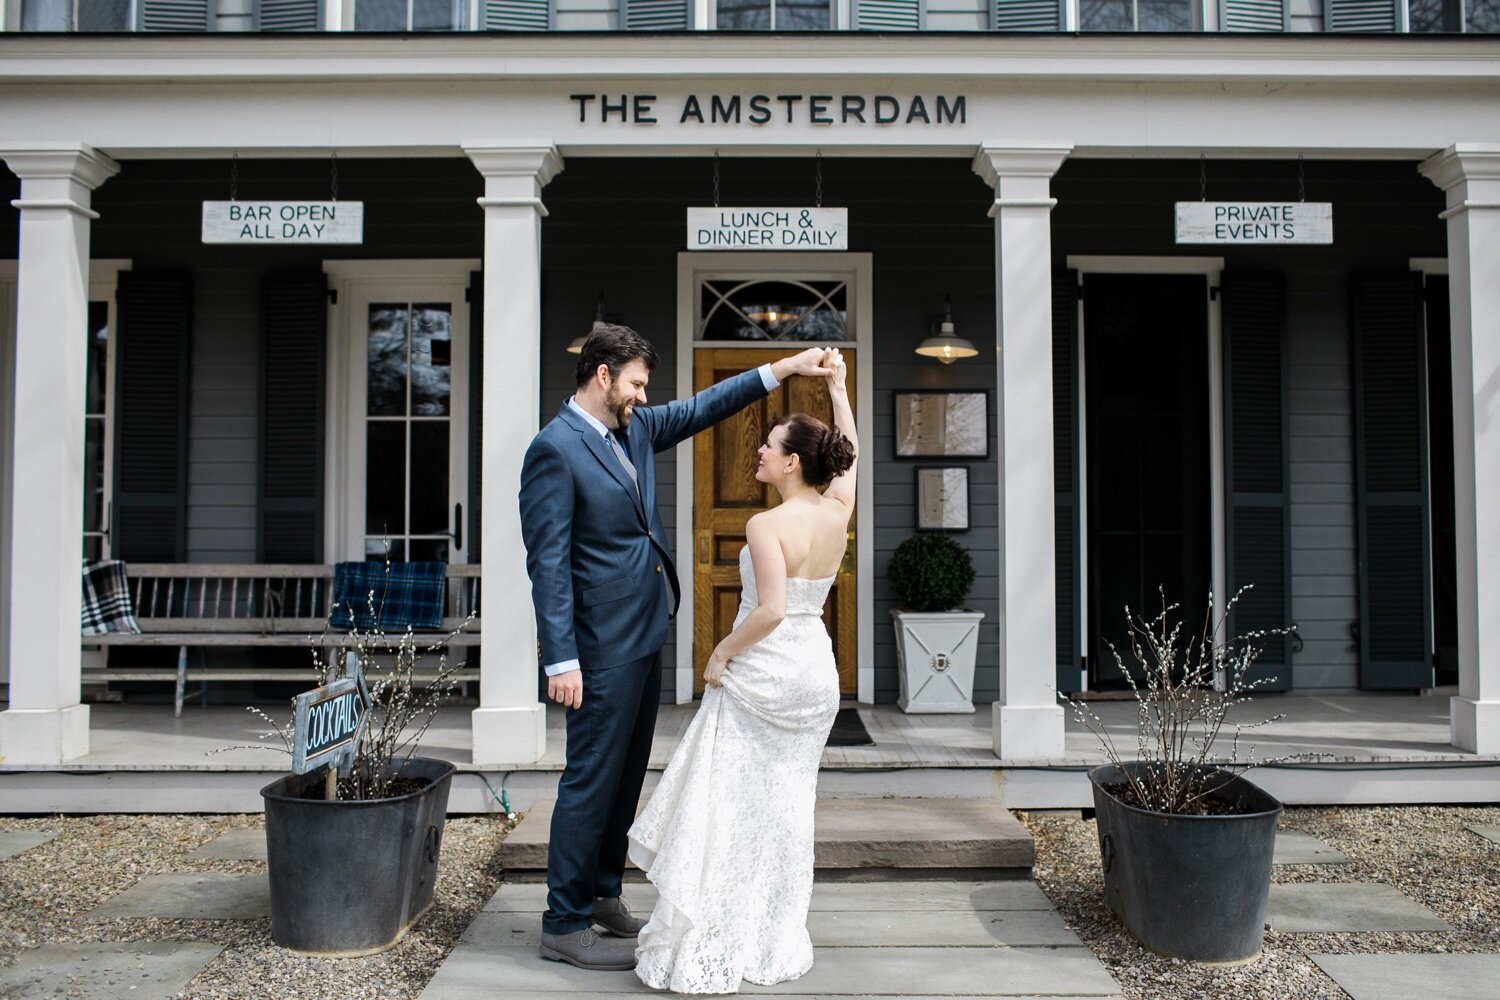 32_Bride and groom photos at the Amsterdam in Rhinebeck NY.jpg